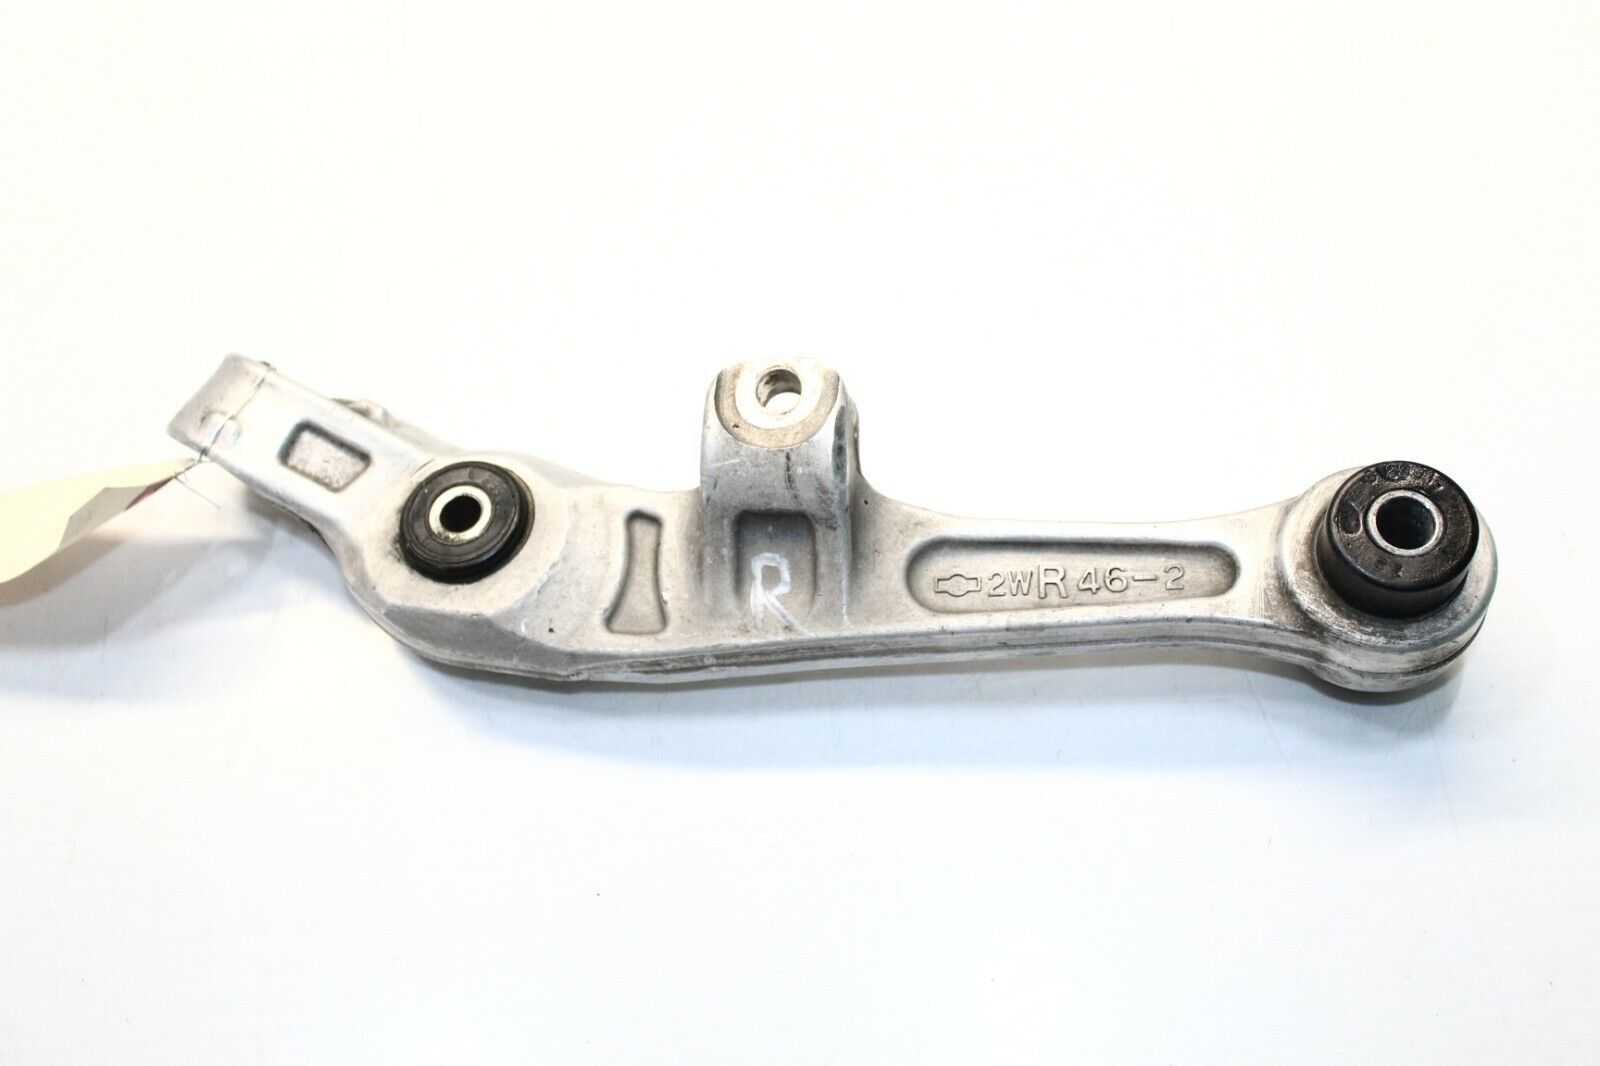 2003-2007 INFINITI G35 COUPE FRONT RIGHT PASSENGER LOWER CONTROL ARM P2427 - $92.00